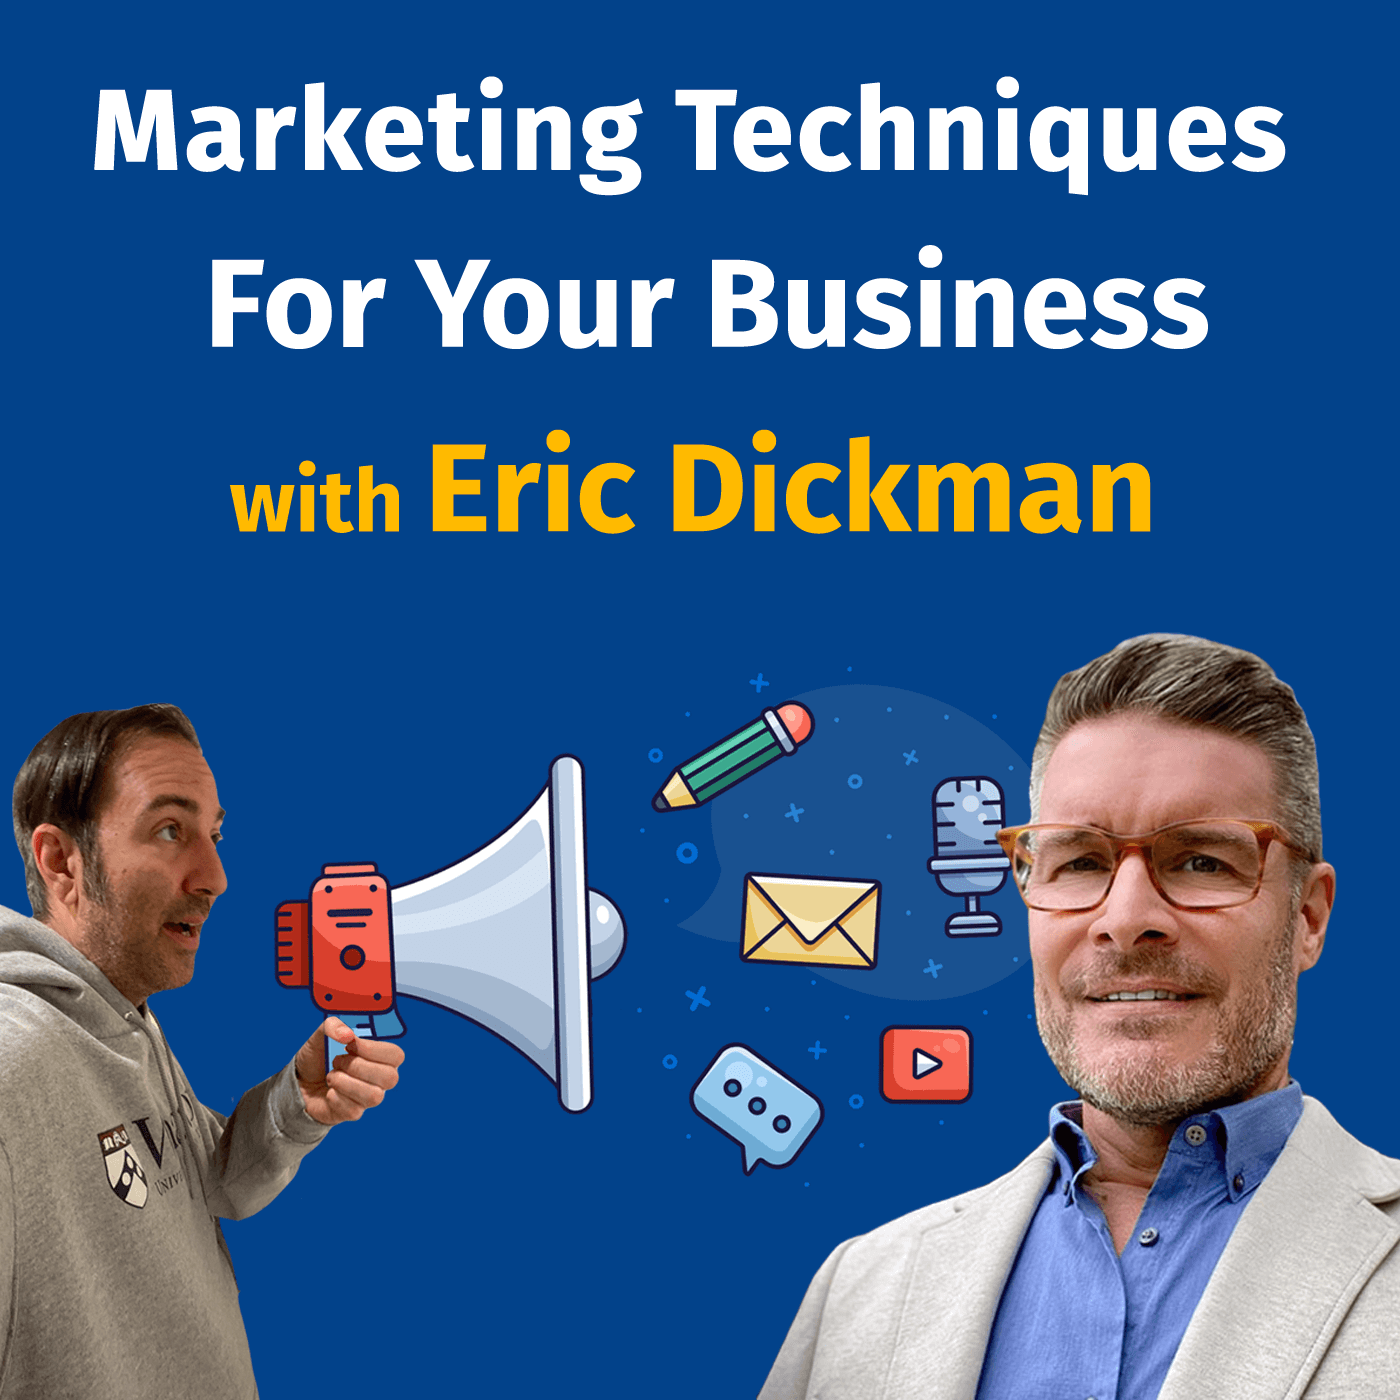 Marketing Techniques for your Business with Eric Dickman